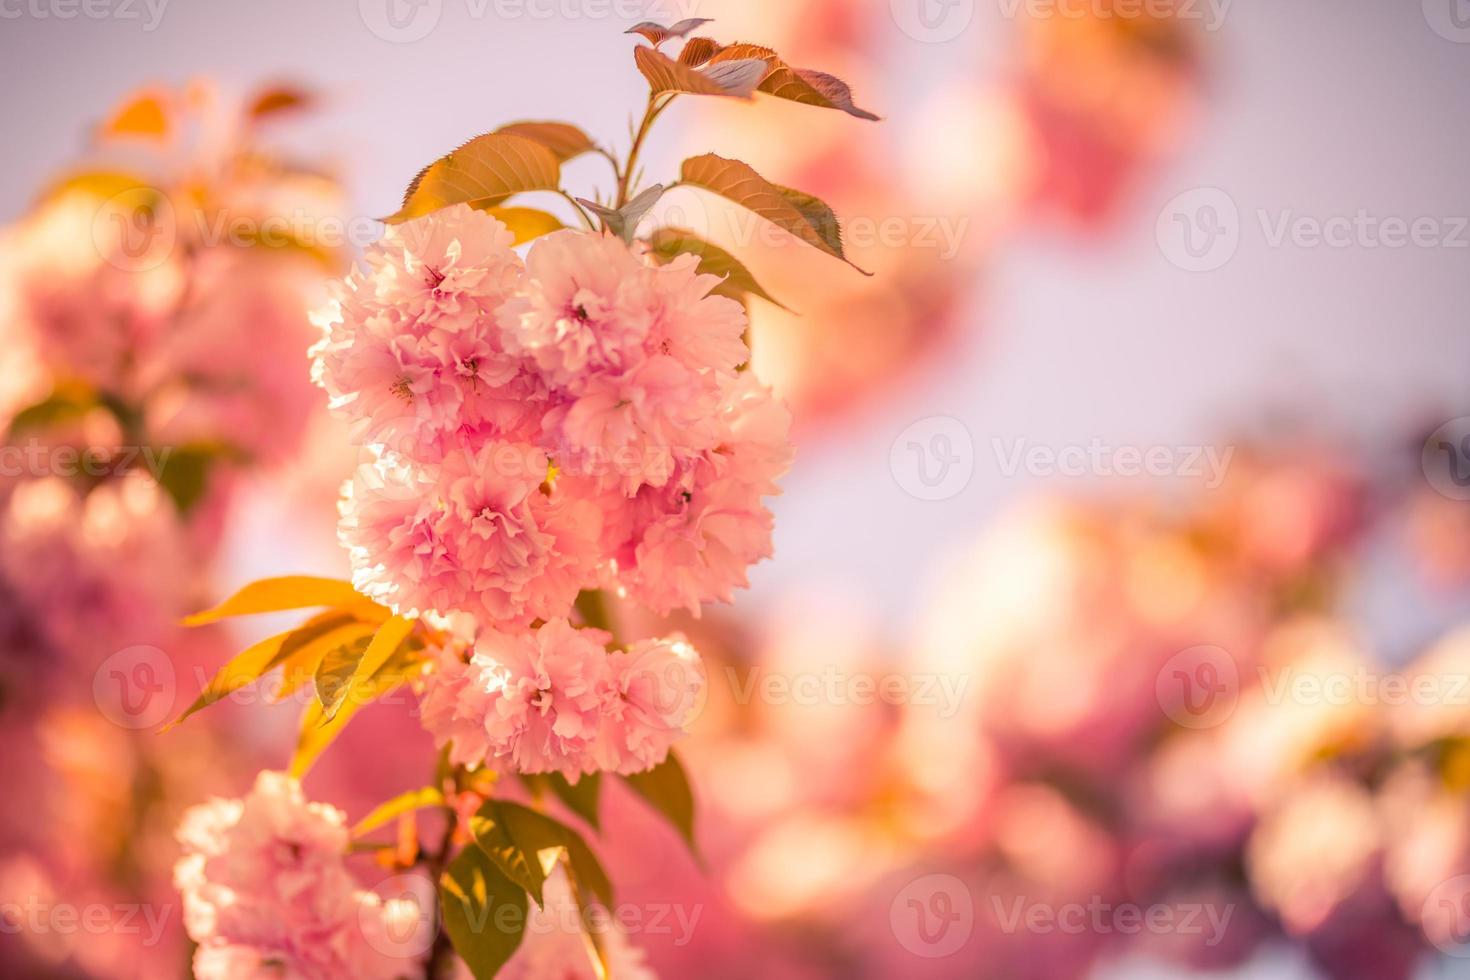 Spring blooming tree, soft sunset sunlight, bright flowers and delicate blue sky. Beautiful nature scenery photo